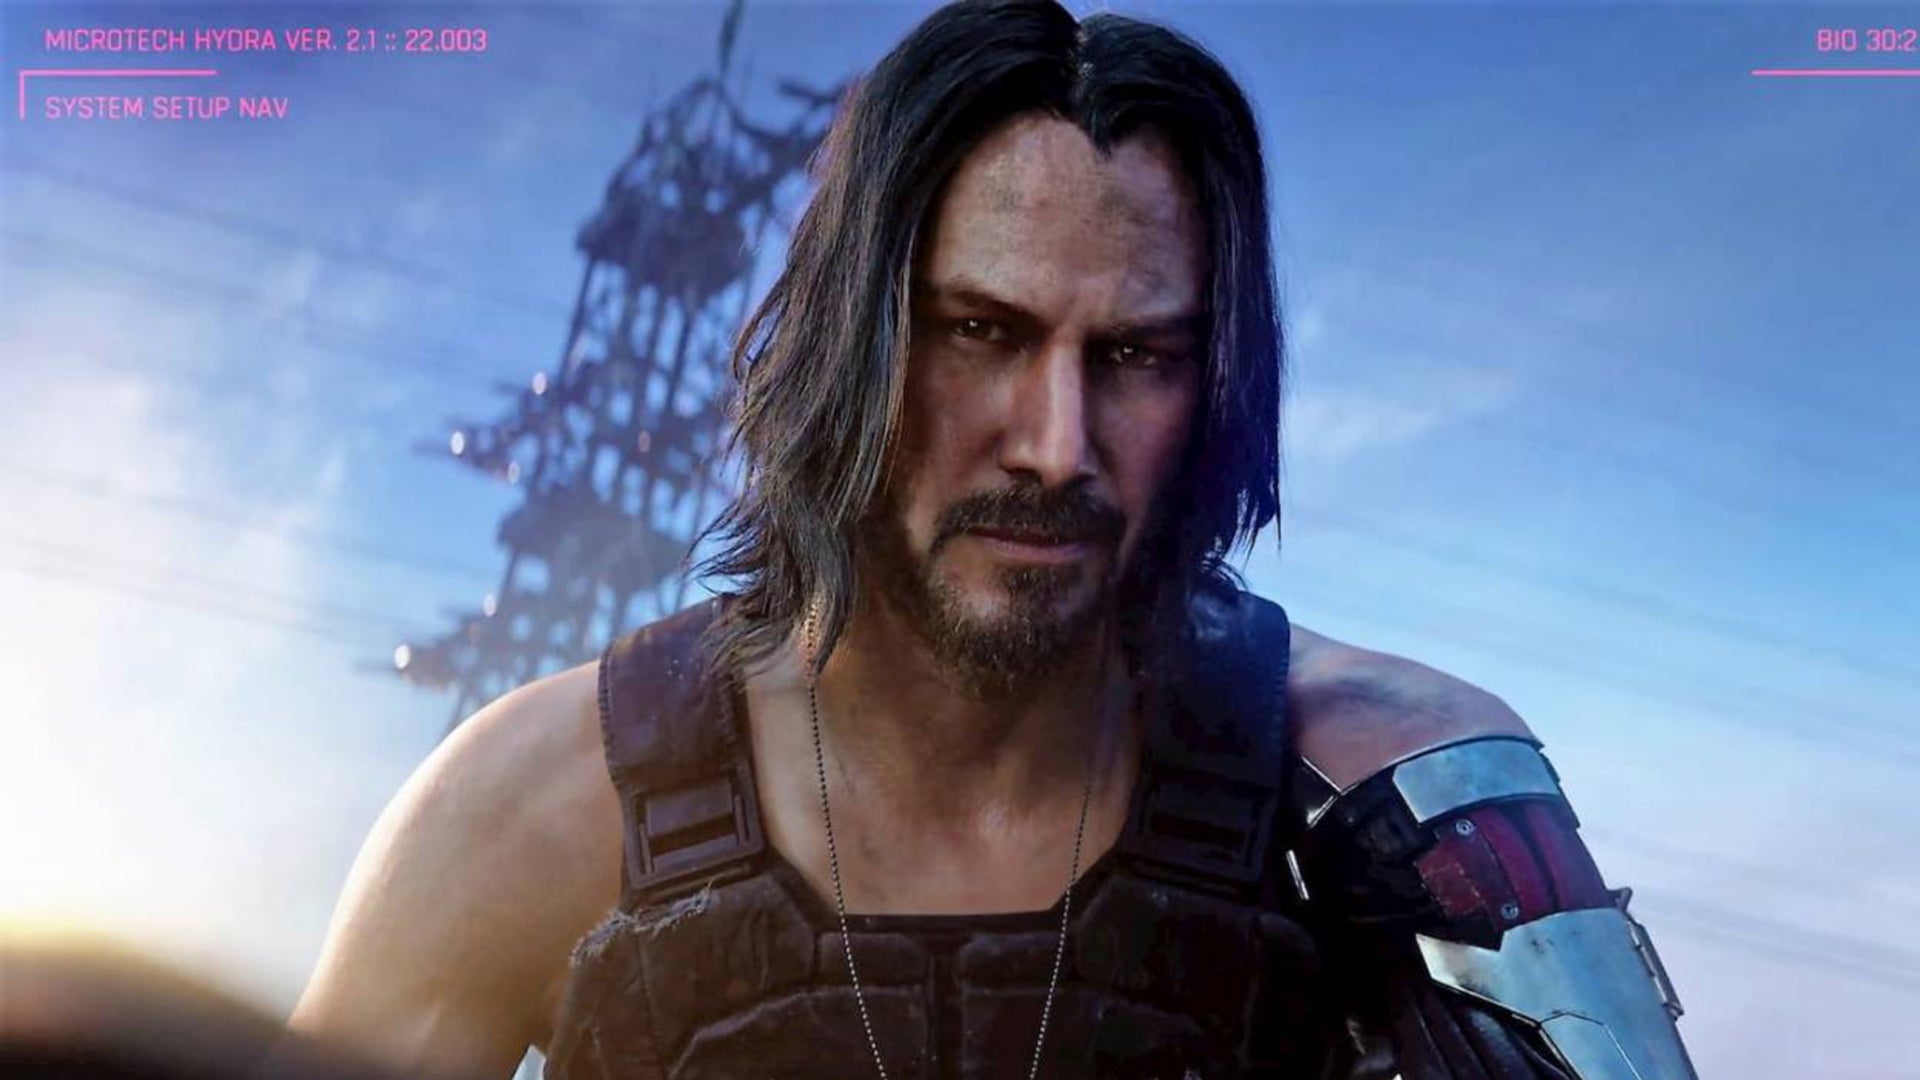 Johnny Silverhand, as depicted in the upcoming Cyberpunk 2077 video game.